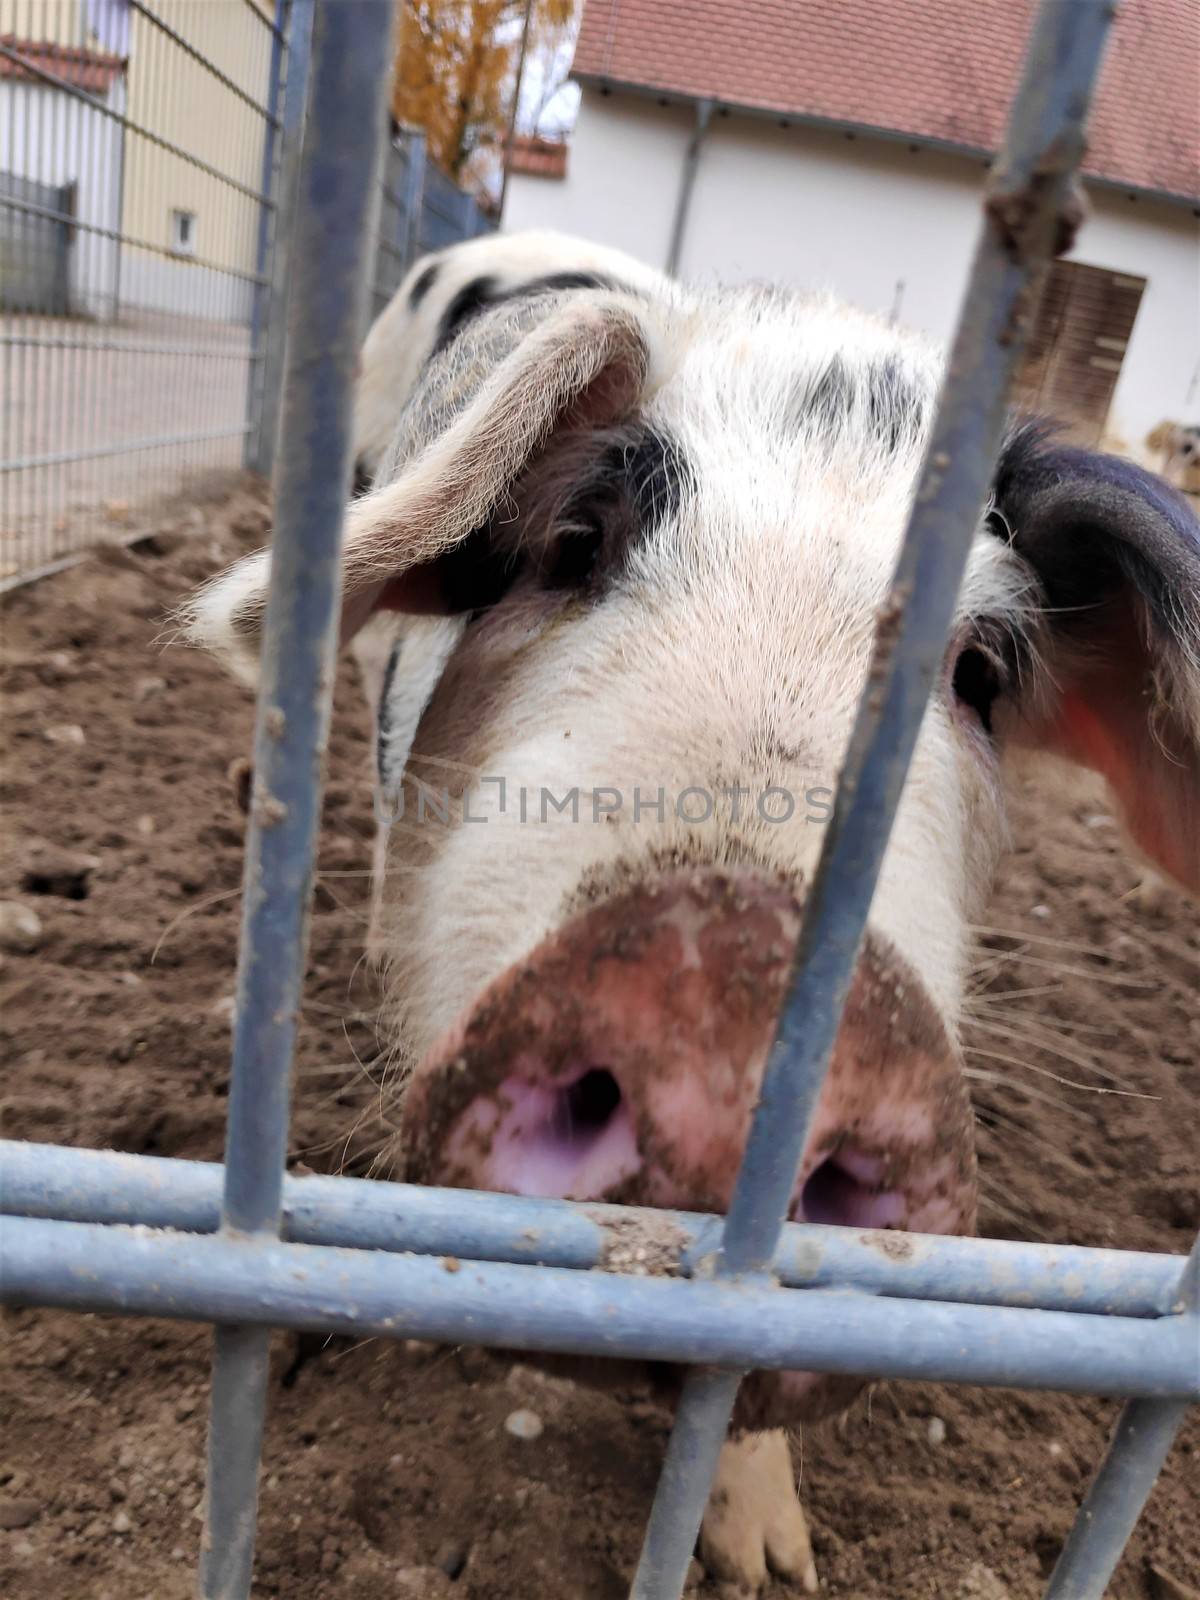 Bentheim black pied pig caged behind fence by pisces2386